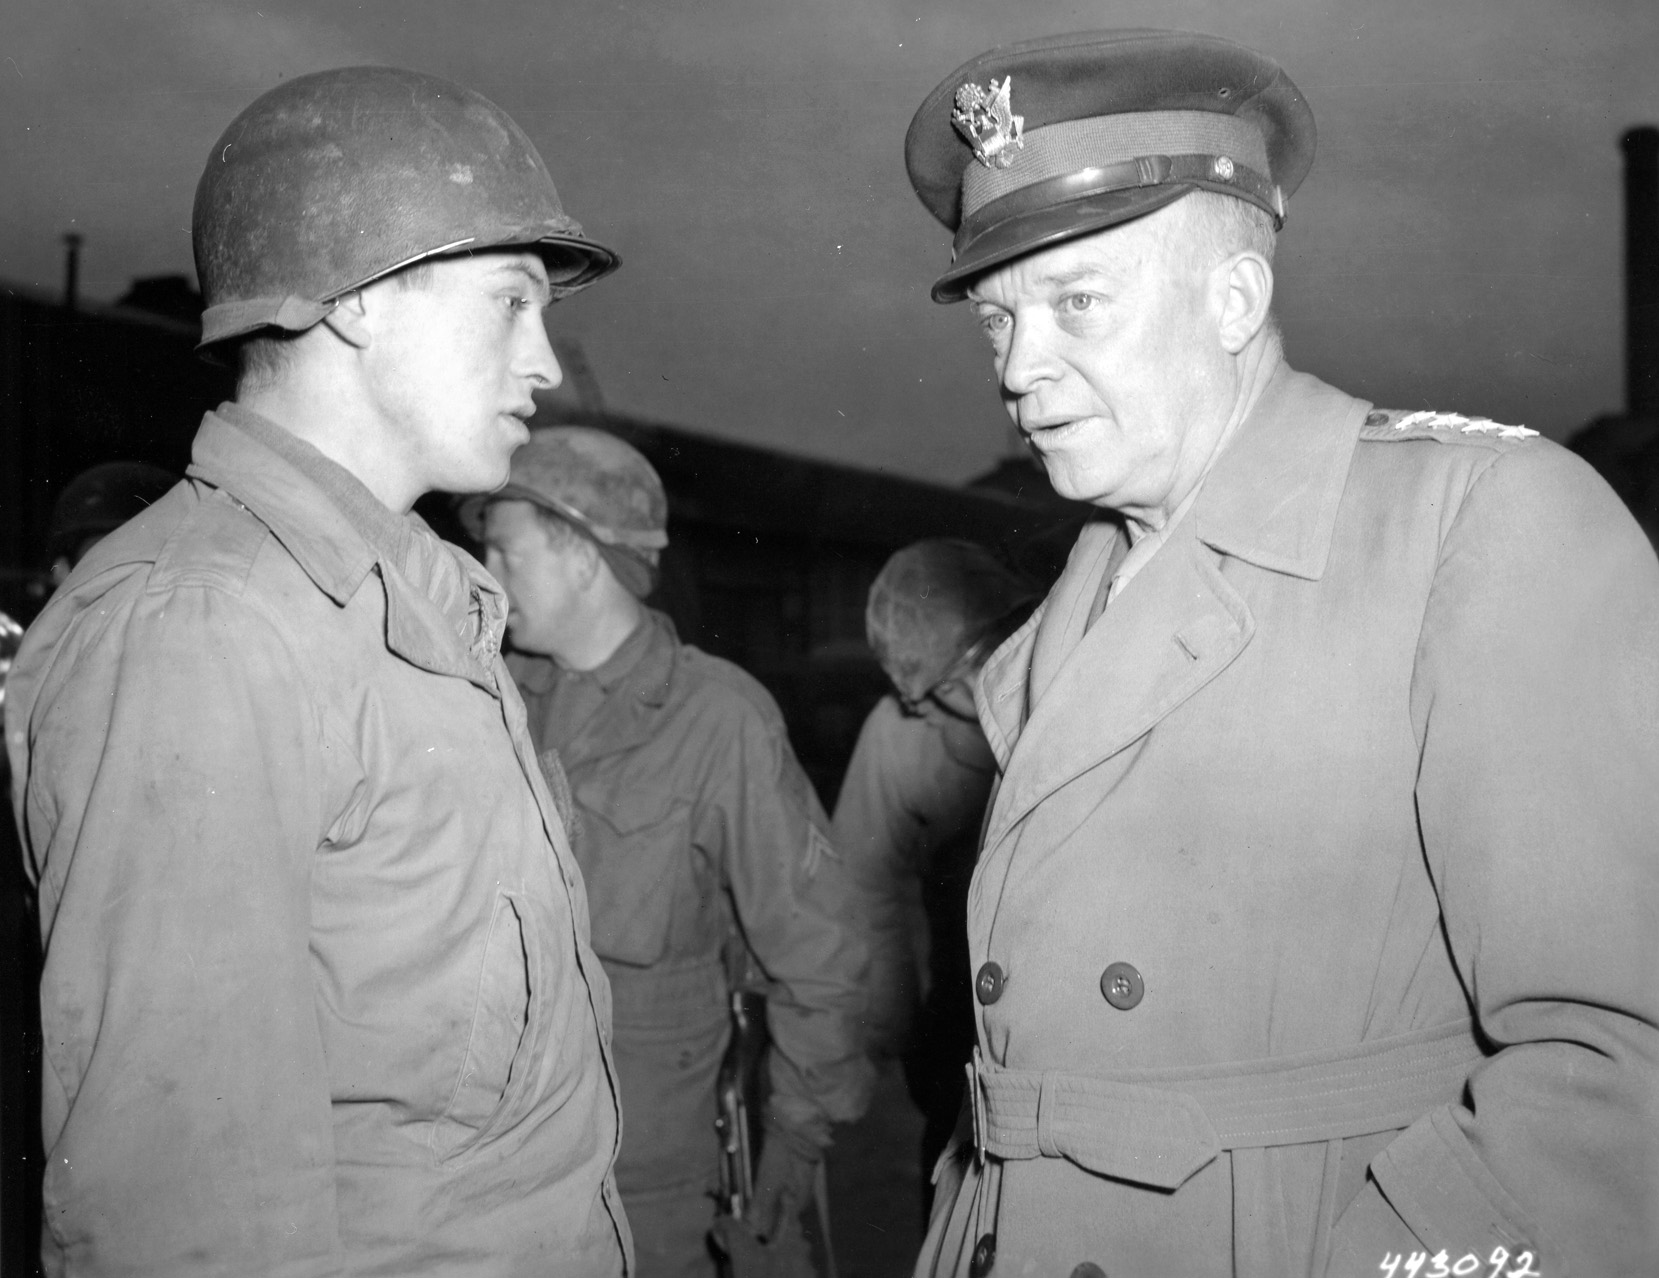 Eisenhower talks with Private William J. Forgus, of Columbus, Ohio, who served in an ordnance unit.